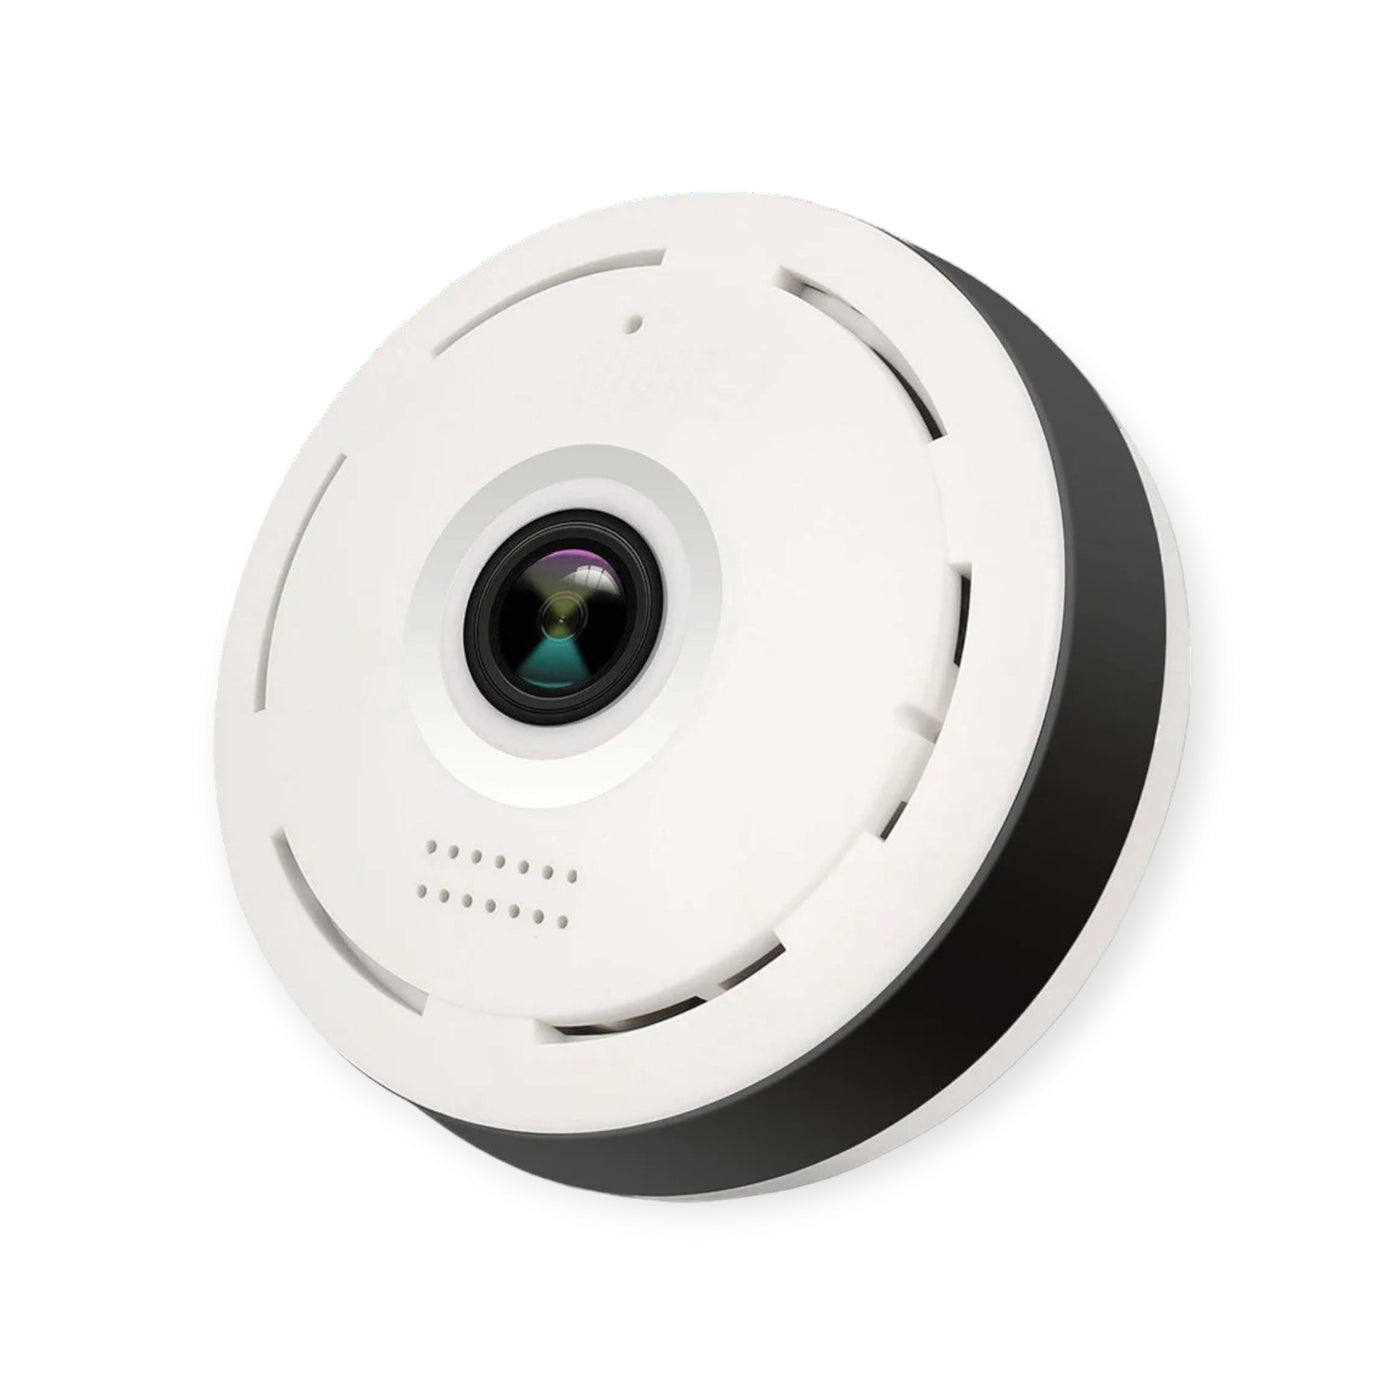 WiFi Panoramic Fisheye 360 Wide Angle CameraMain Features:
1.   360 degree panoramic view, see the whole picture in the home, without rotating the camera, monitor without dead Angle.

2 .   Professional fisheyWiFi Panoramic Fisheye 360 Wide Angle CameraZam Zam Store